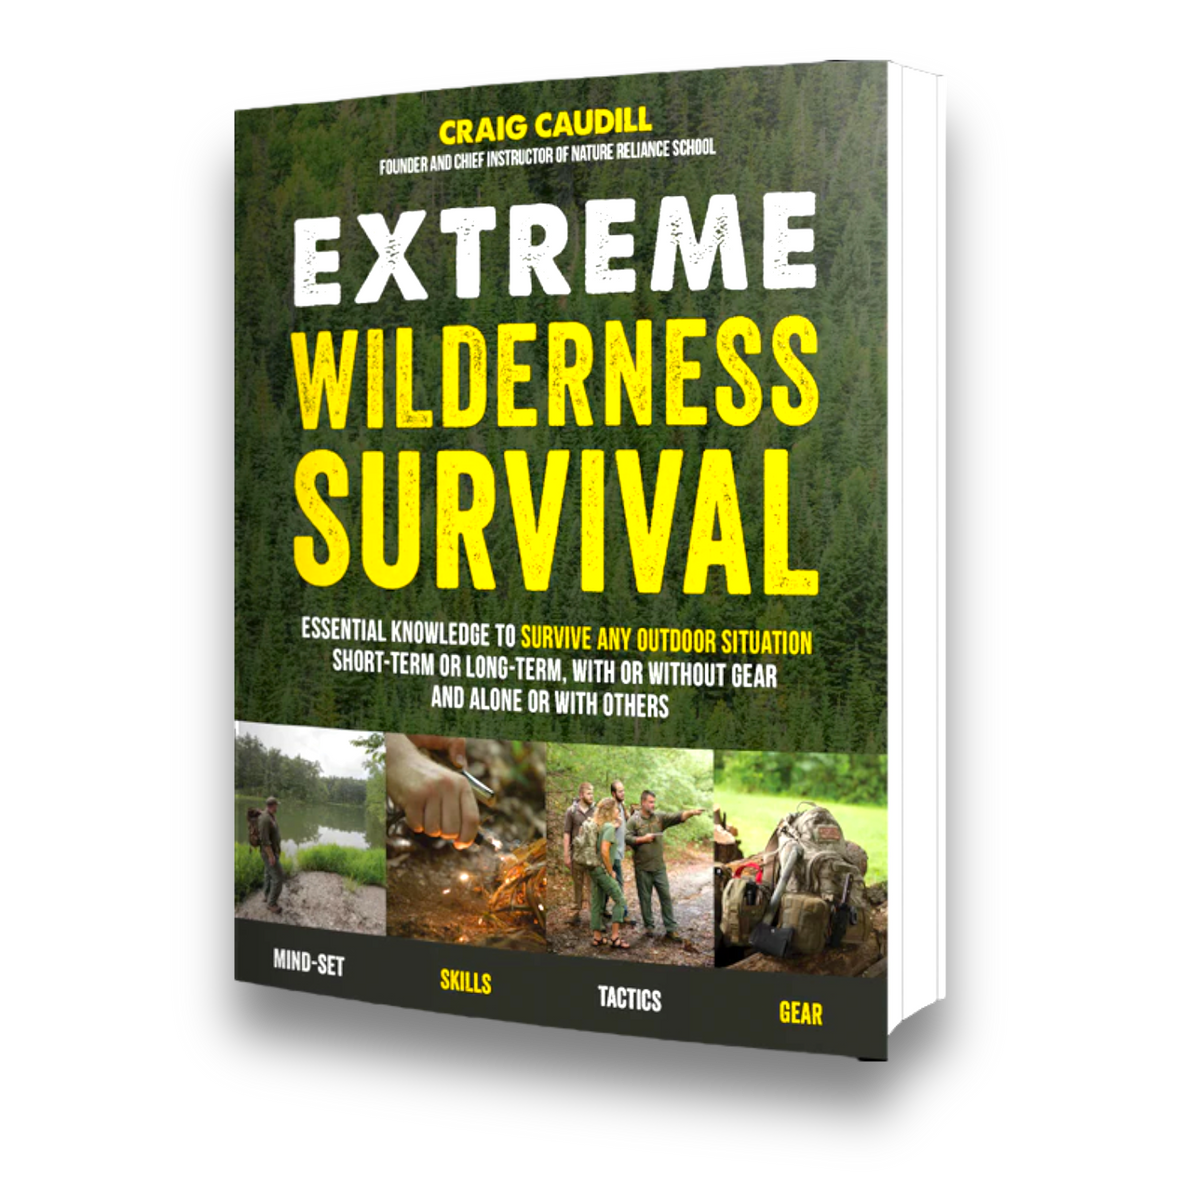 Extreme Wilderness Survival:  Essential Knowledge to Survive Any Outdoor Situation Short-Term or Long-Term, With or Without Gear and Alone or With Others